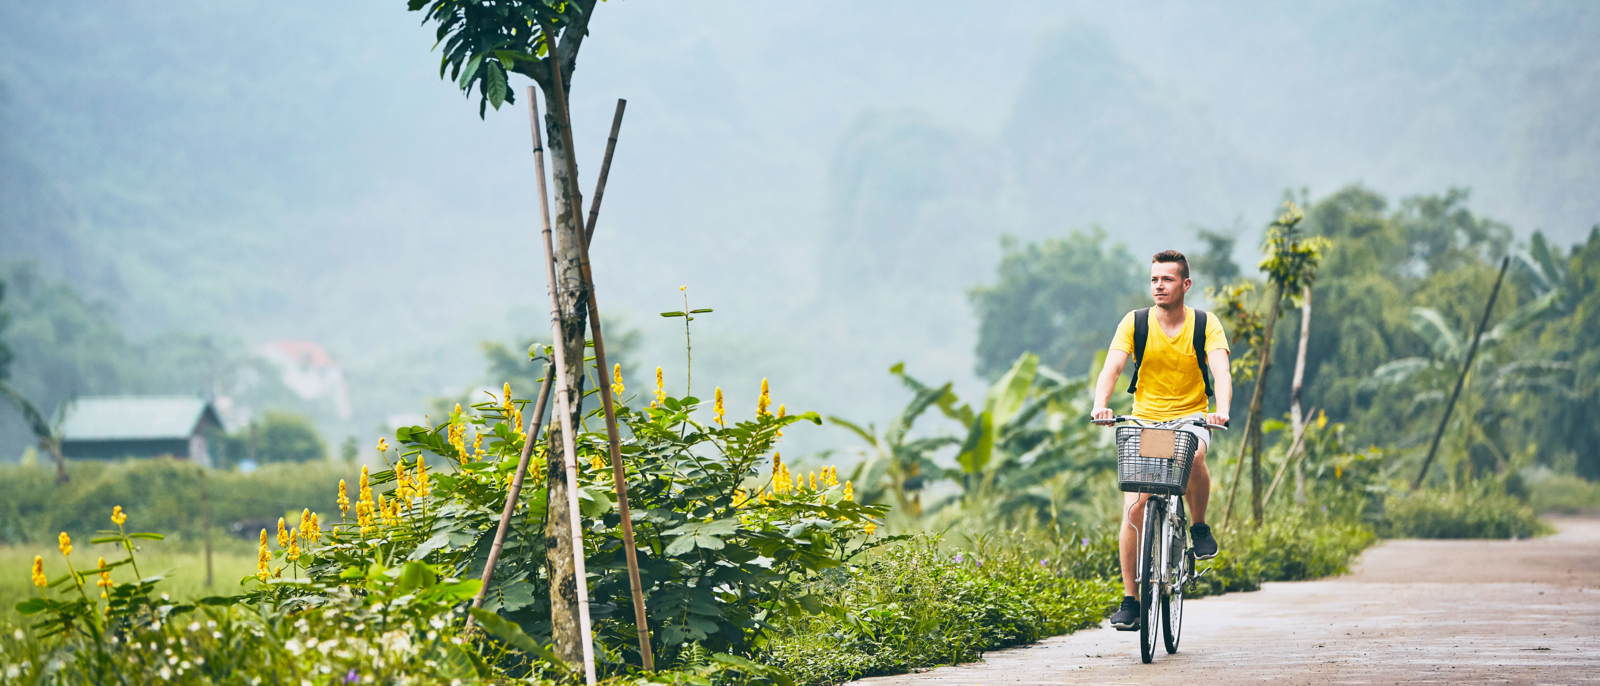 Trip by bike. Man with backpack bicycling on road against karst formation in Ninh Binh province, Vietnam